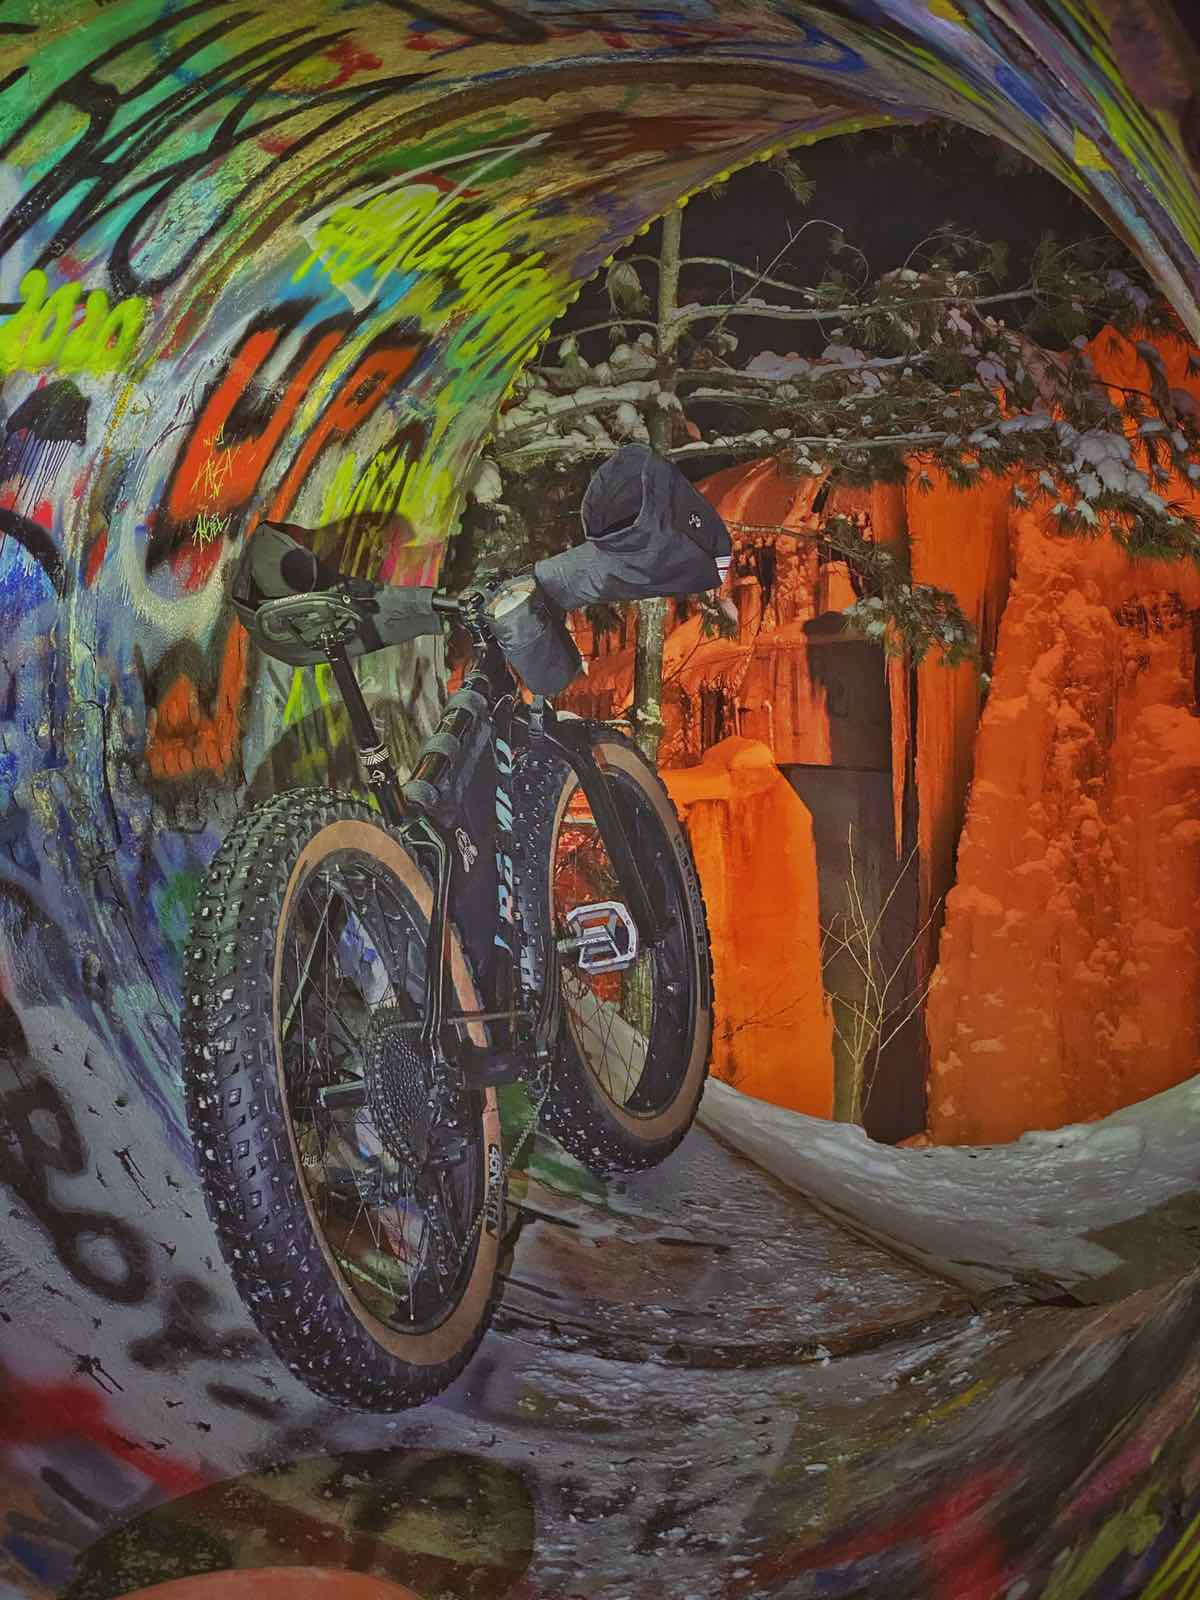 bikerumor pic of the day a fat bike is inside a drainage pipe with colorful graffiti inside and what looks like ice beyond the tunnel with an orange light on it.